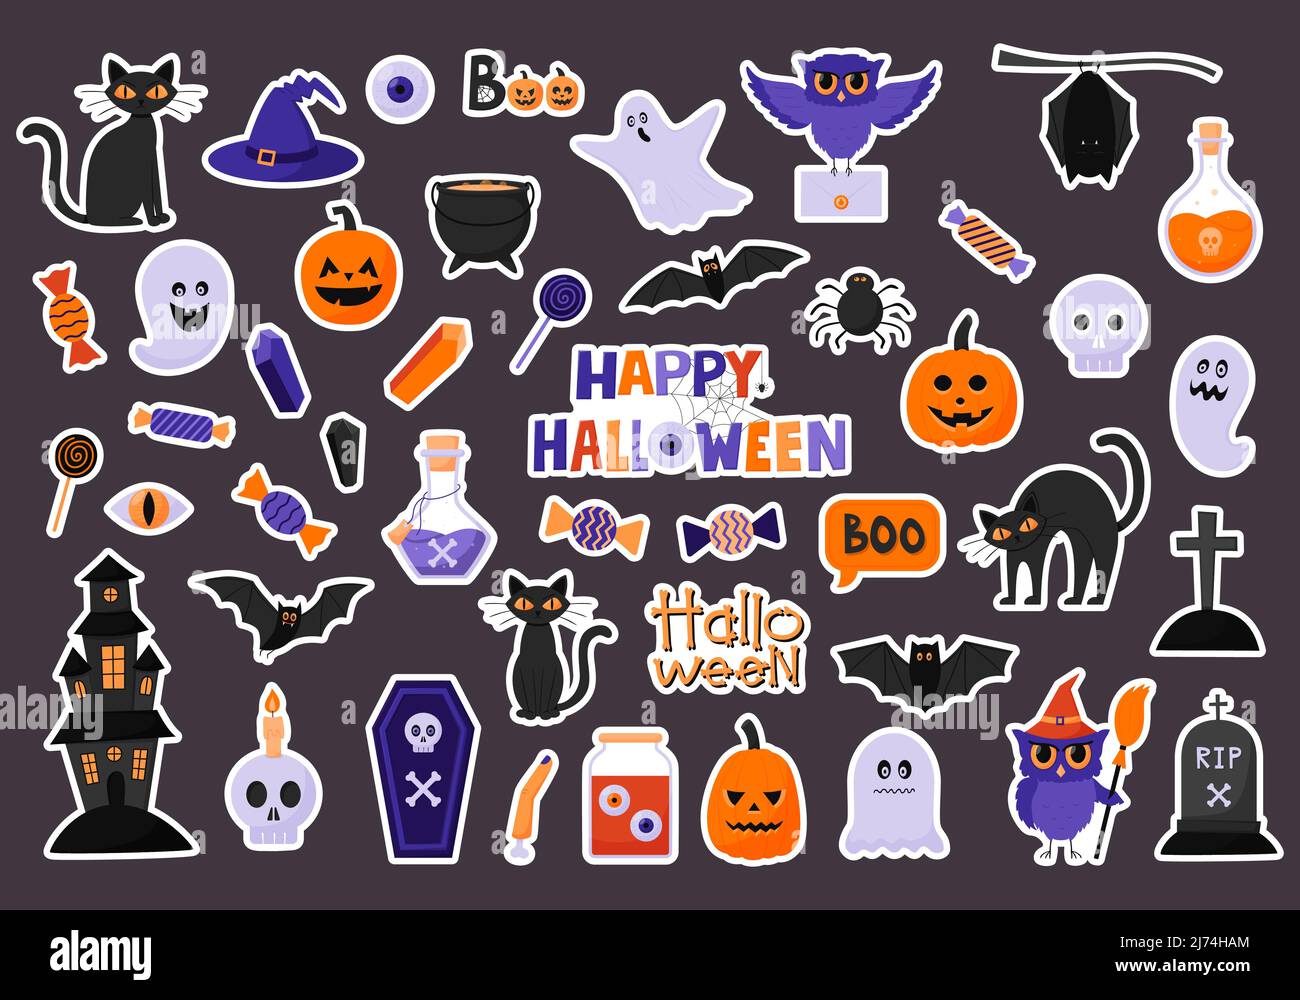 A set of stickers for celebrating Halloween. Sticker pack with a white border. Halloween characters and attributes in flat style. Ghost, owl cat, bat, Stock Vector